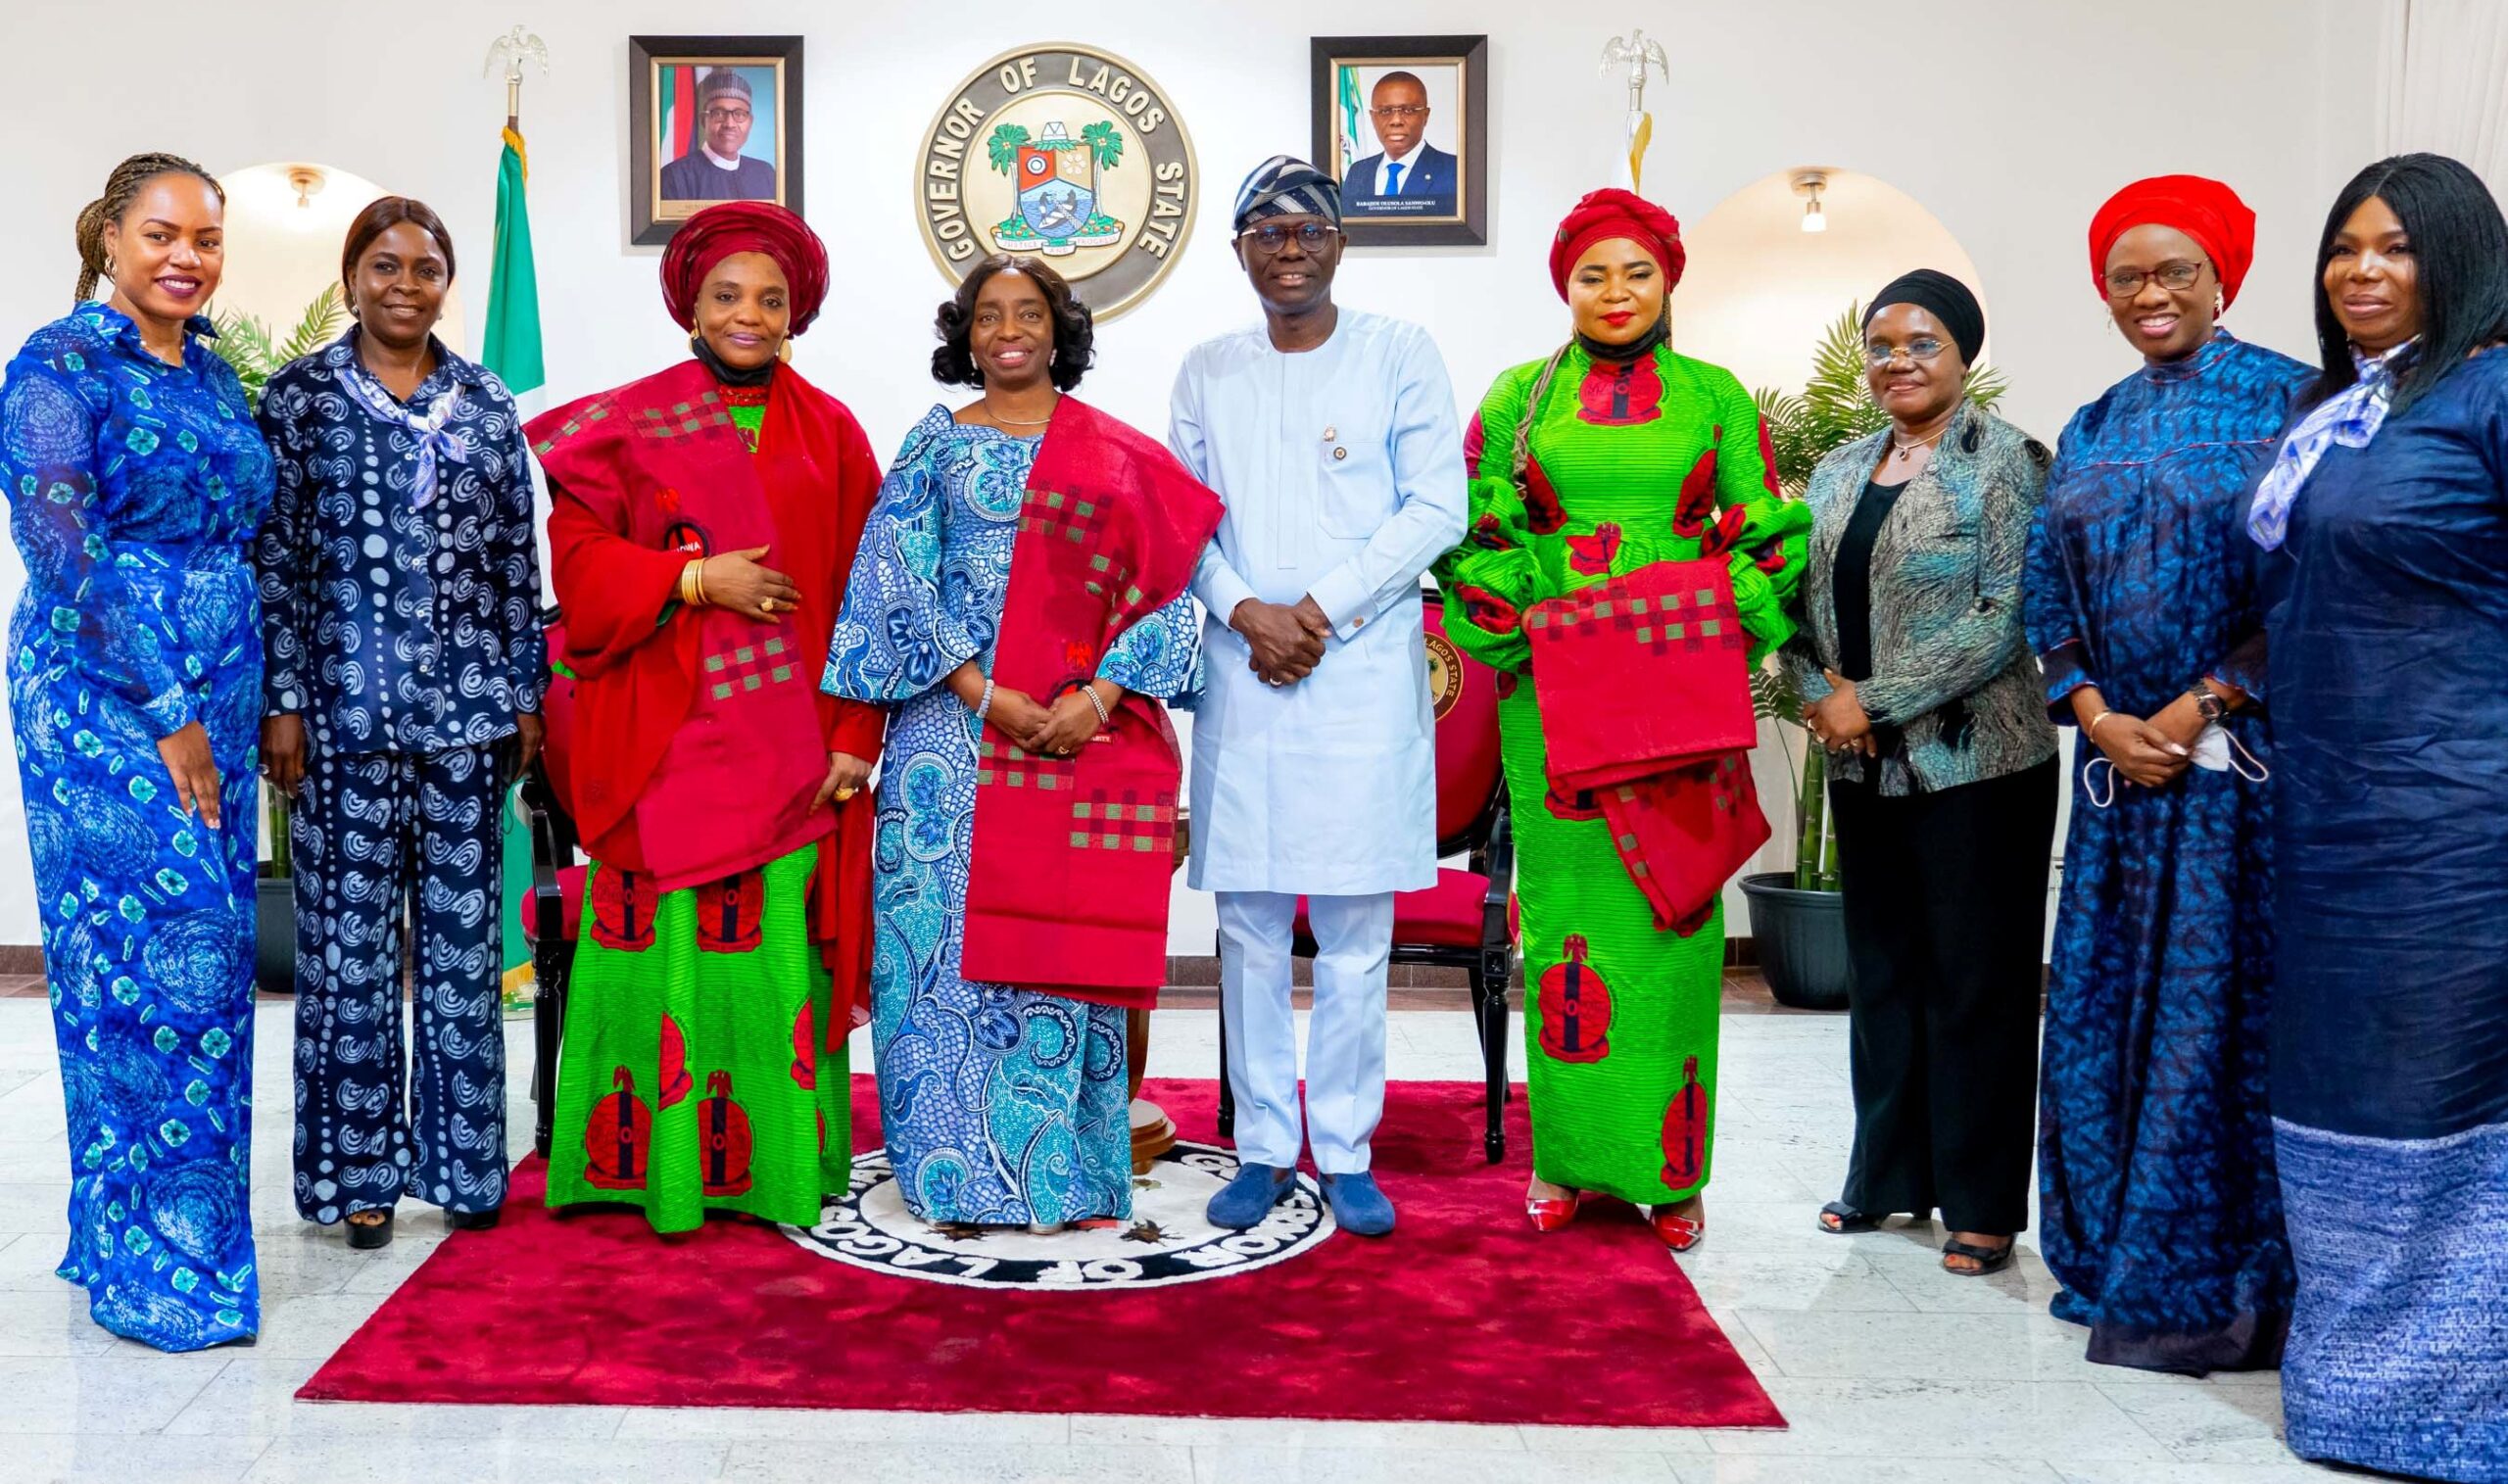 PHOTOS: NIGERIAN ARMY OFFICERS’ WIVES ASSOCIATION, NAOWA LED BY WIFE OF THE CHIEF OF ARMY STAFF, MRS SALAMATU YAHAYA PAY COURTESY CALL ON GOVERNOR SANWO-OLU AT LAGOS HOUSE, MARINA, ON THURSDAY, JANUARY 27 2022